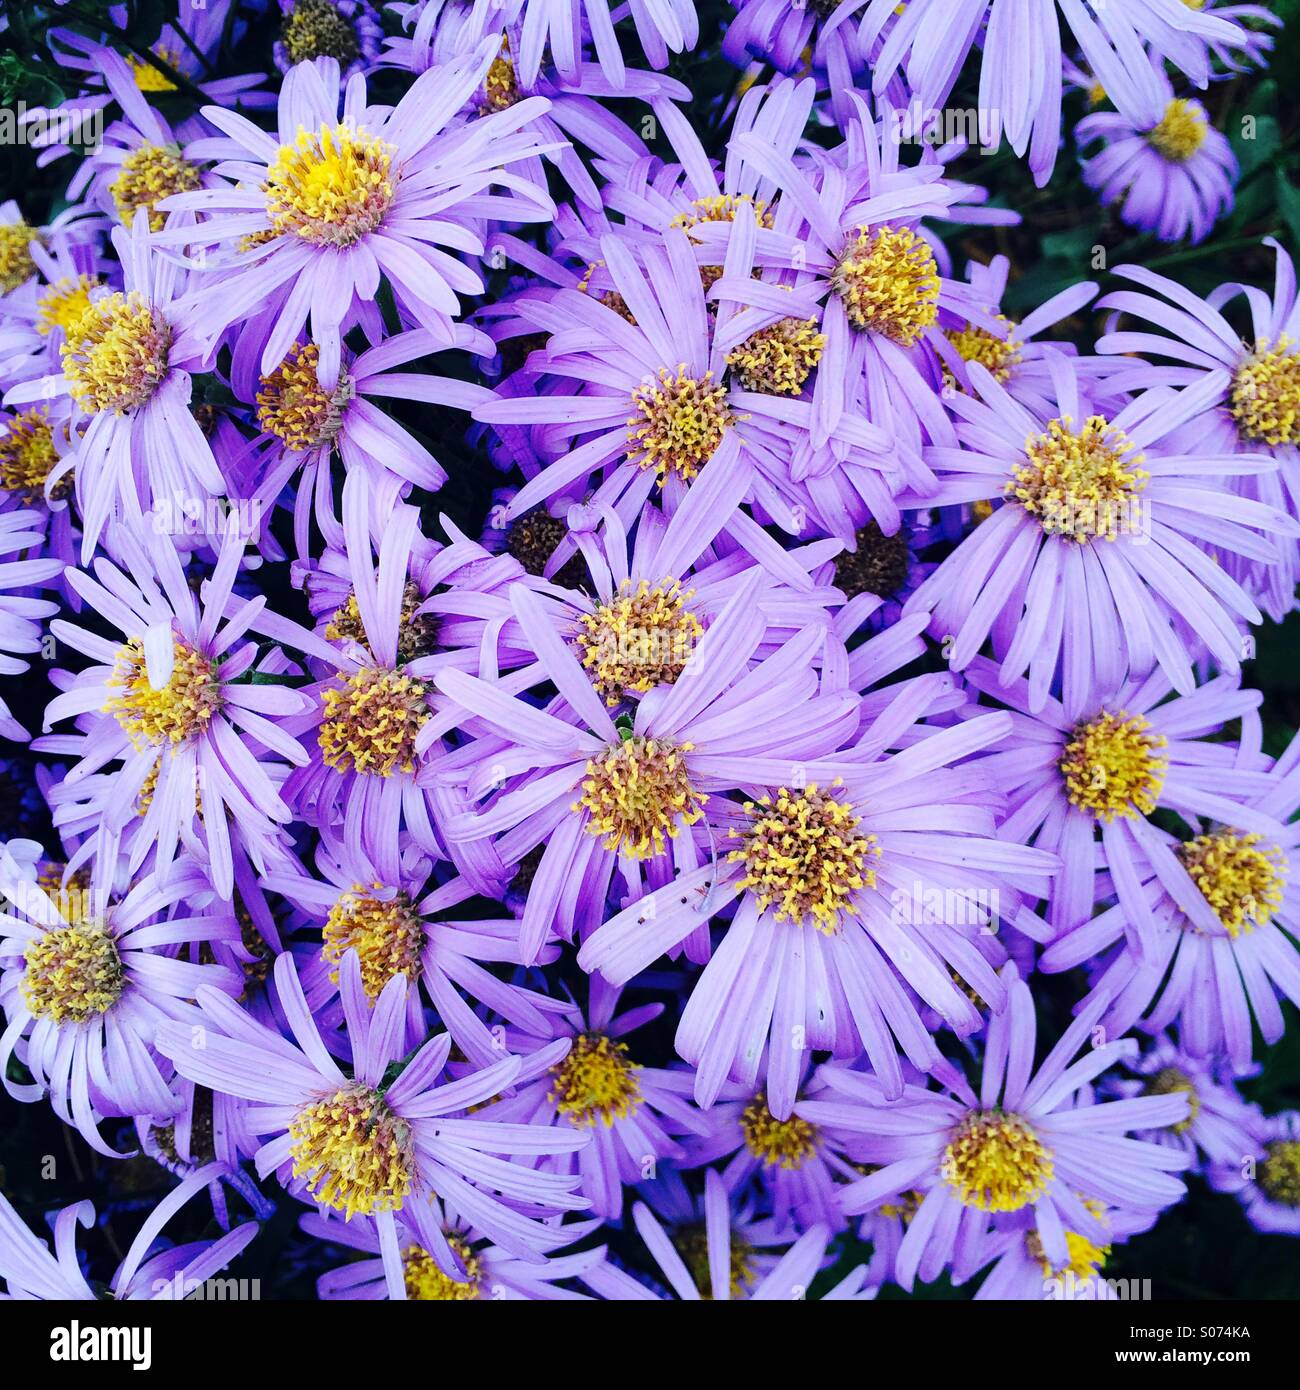 Full frame of purple anemones with bright yellow centres Stock Photo